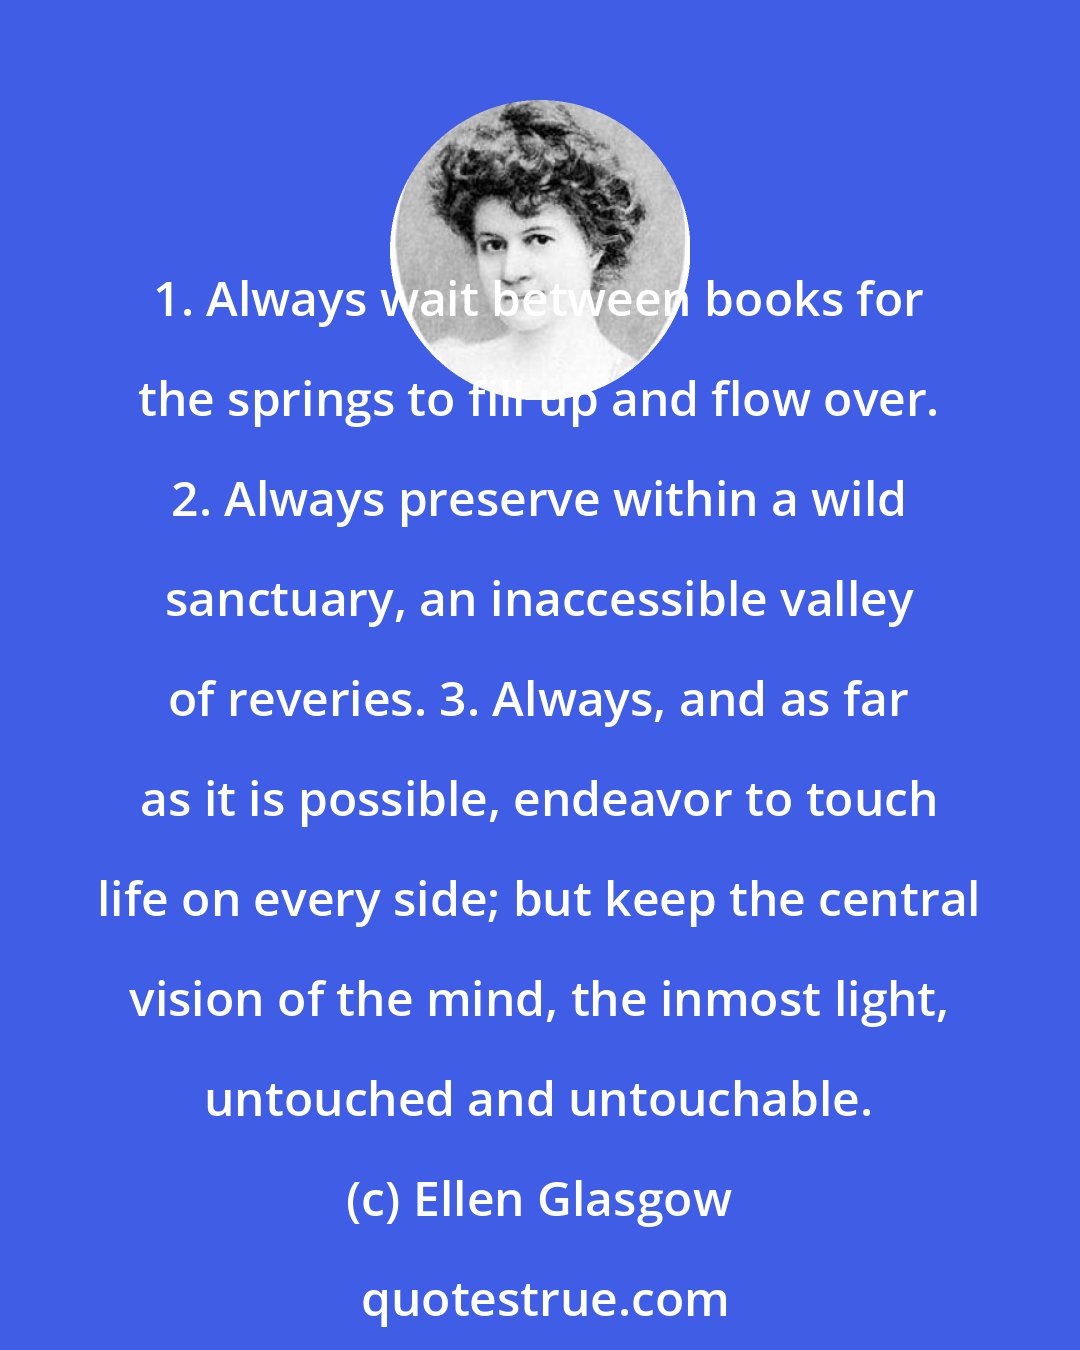 Ellen Glasgow: 1. Always wait between books for the springs to fill up and flow over. 2. Always preserve within a wild sanctuary, an inaccessible valley of reveries. 3. Always, and as far as it is possible, endeavor to touch life on every side; but keep the central vision of the mind, the inmost light, untouched and untouchable.